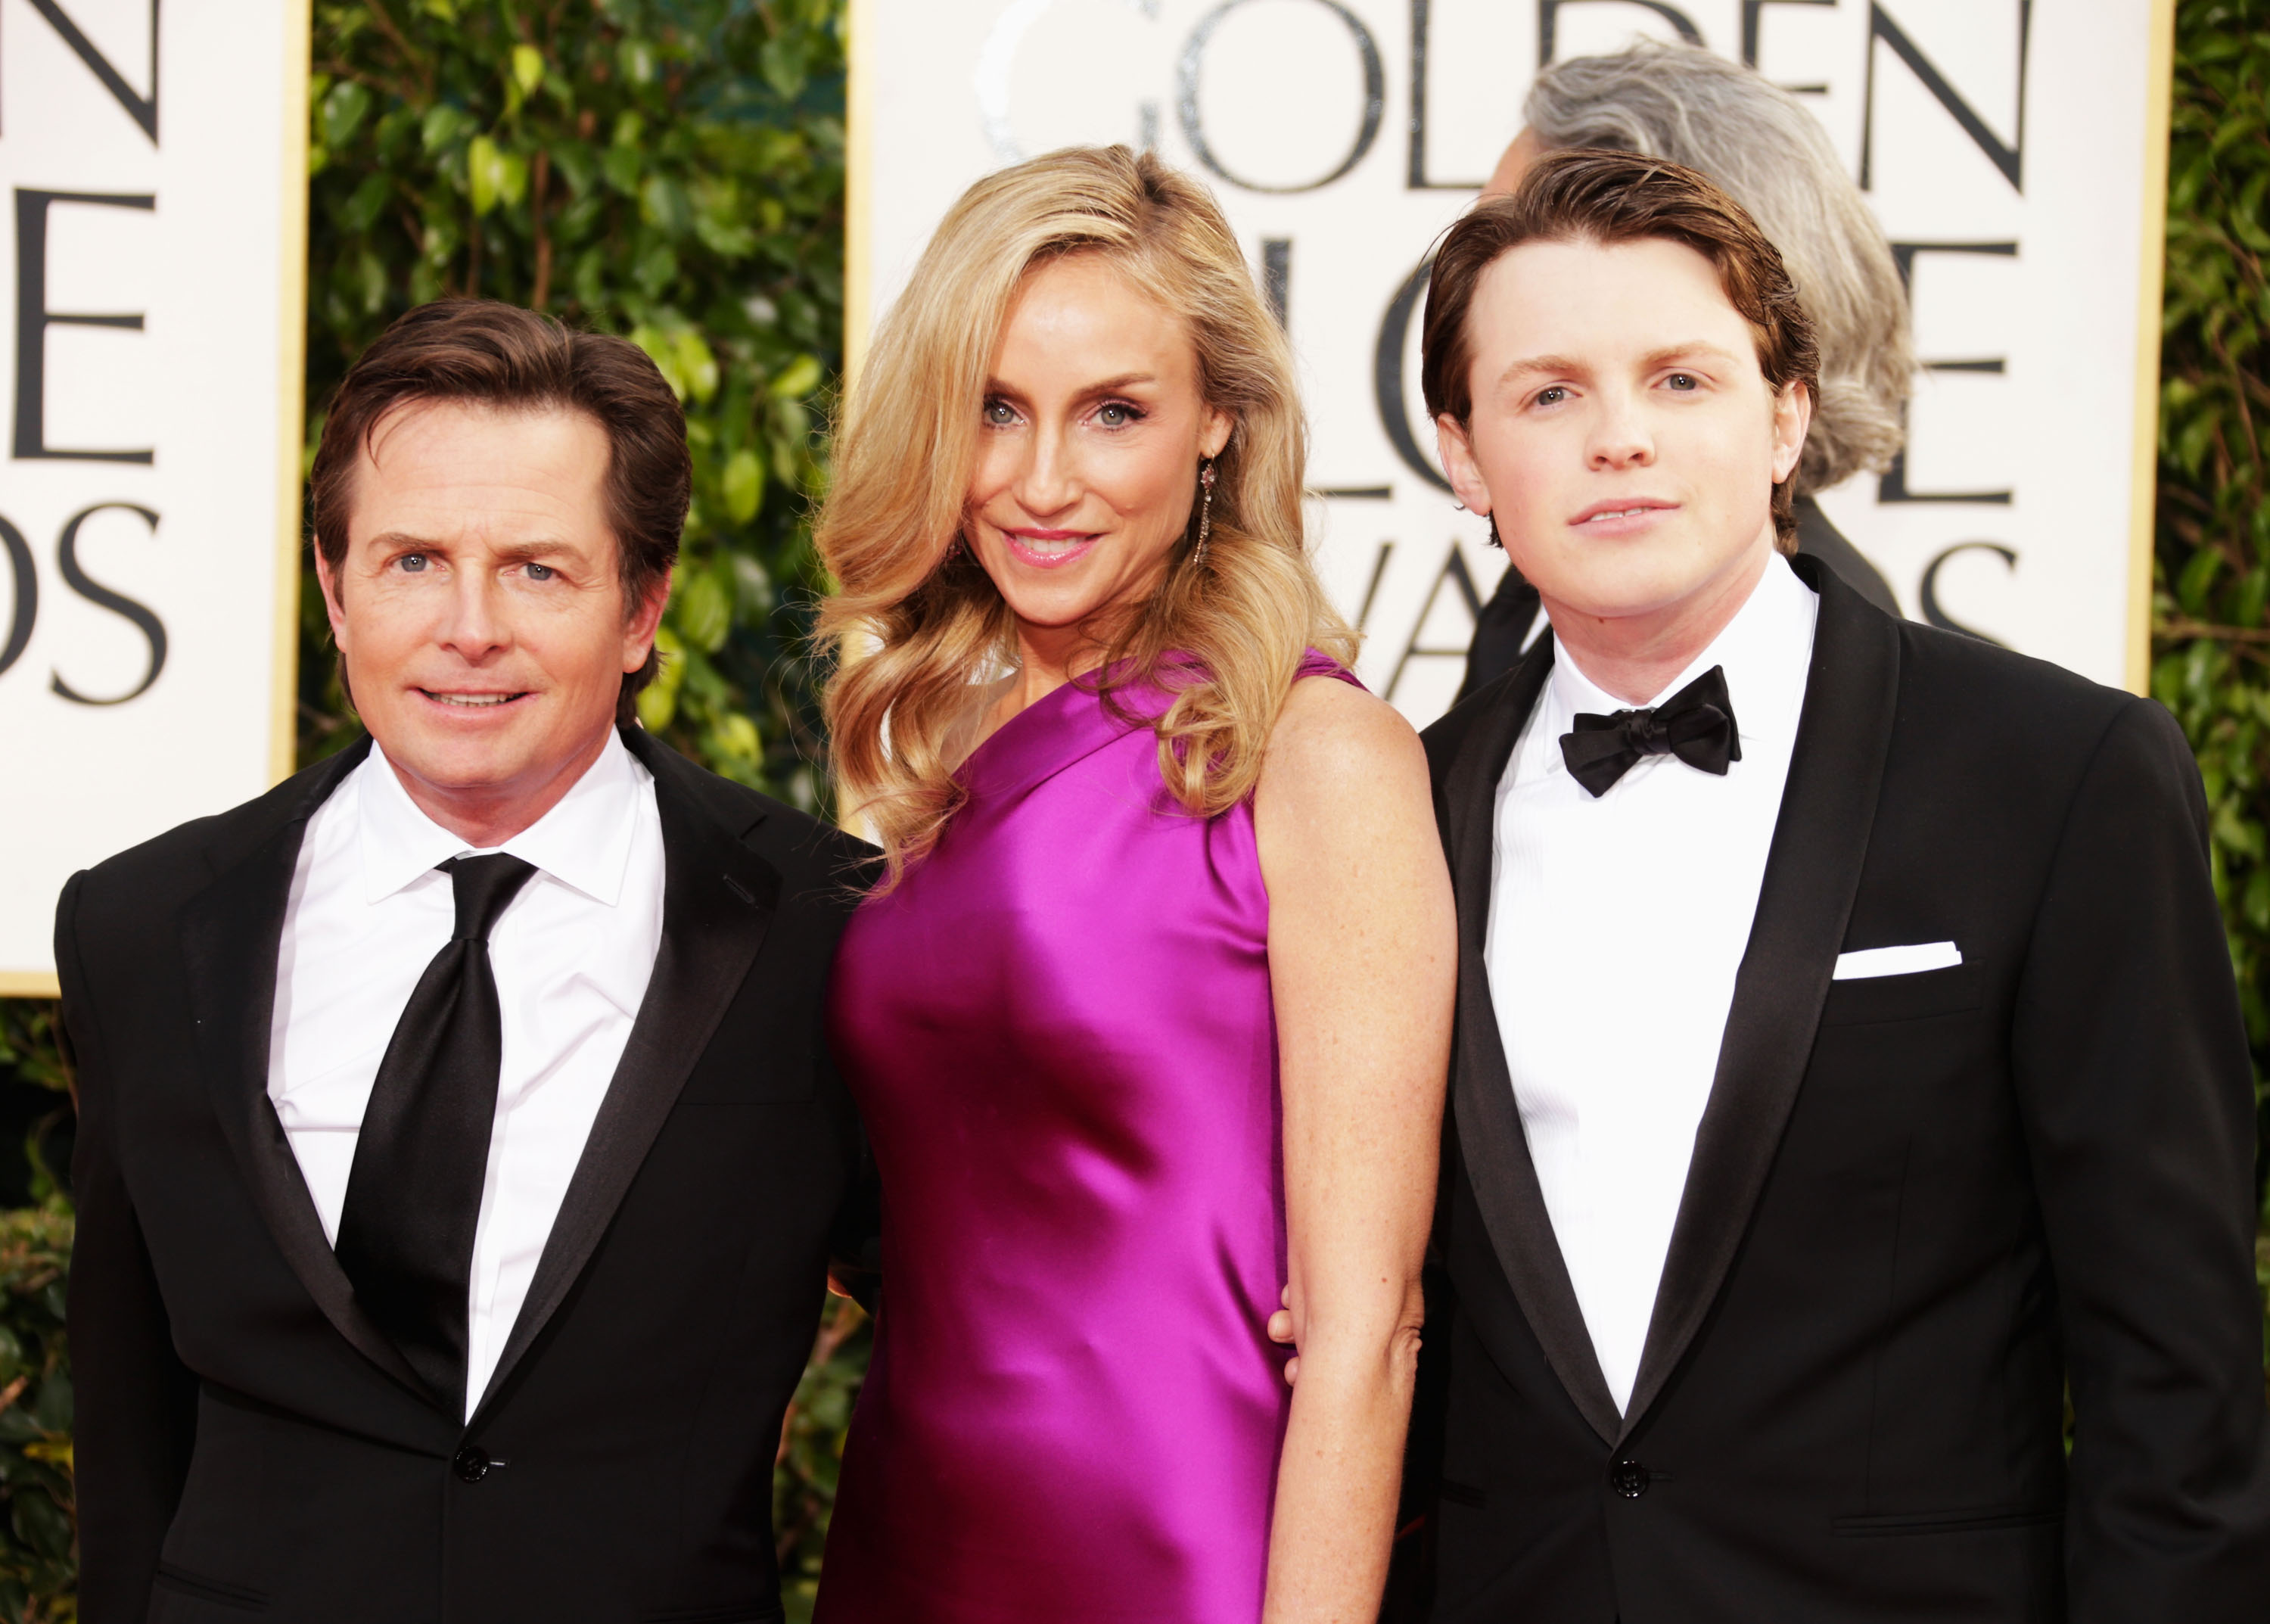 Michael J. Fox, Tracy Pollan and Sam Michael Fox at the 70th Annual Golden Globe Awards in Beverly Hills, California on January 13, 2013 | Source: Getty Images